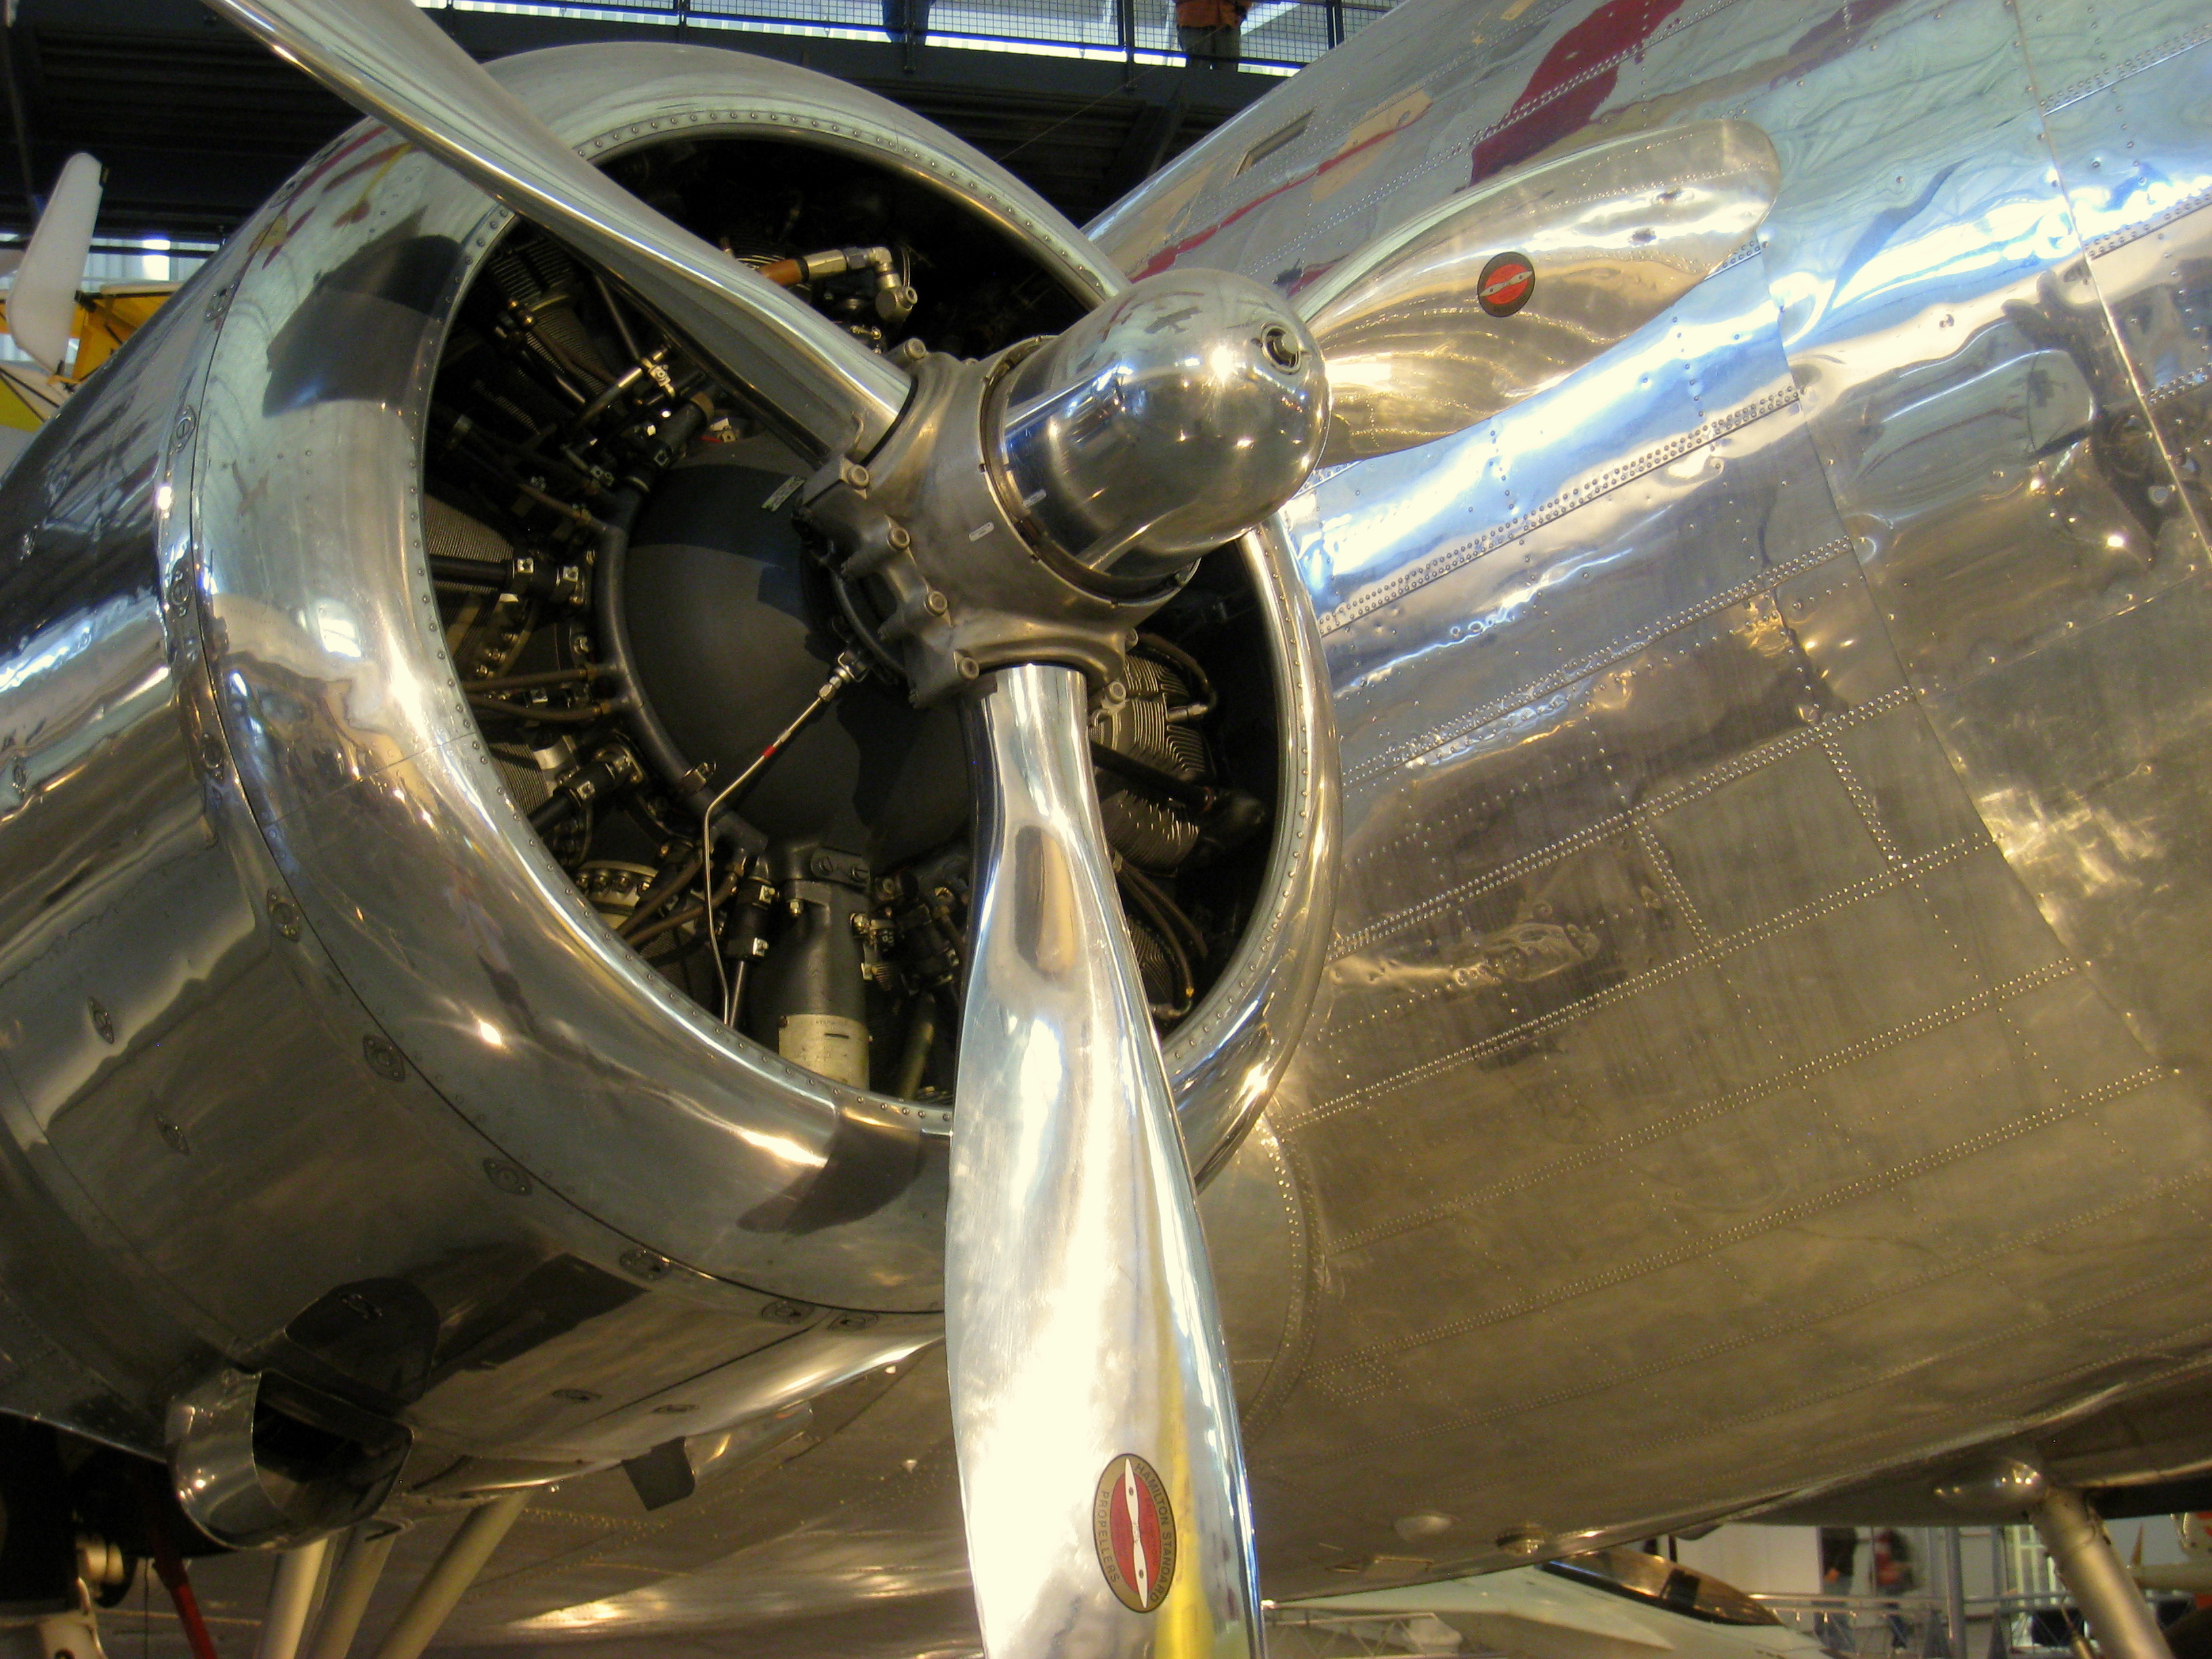 Close-up view of the inner starboard engine of a Boeing 307 Stratoliner aircraft on display at the Steven F. Udvar-Hazy Center, Chantilly, Virginia, United States, 6 Apr 2009